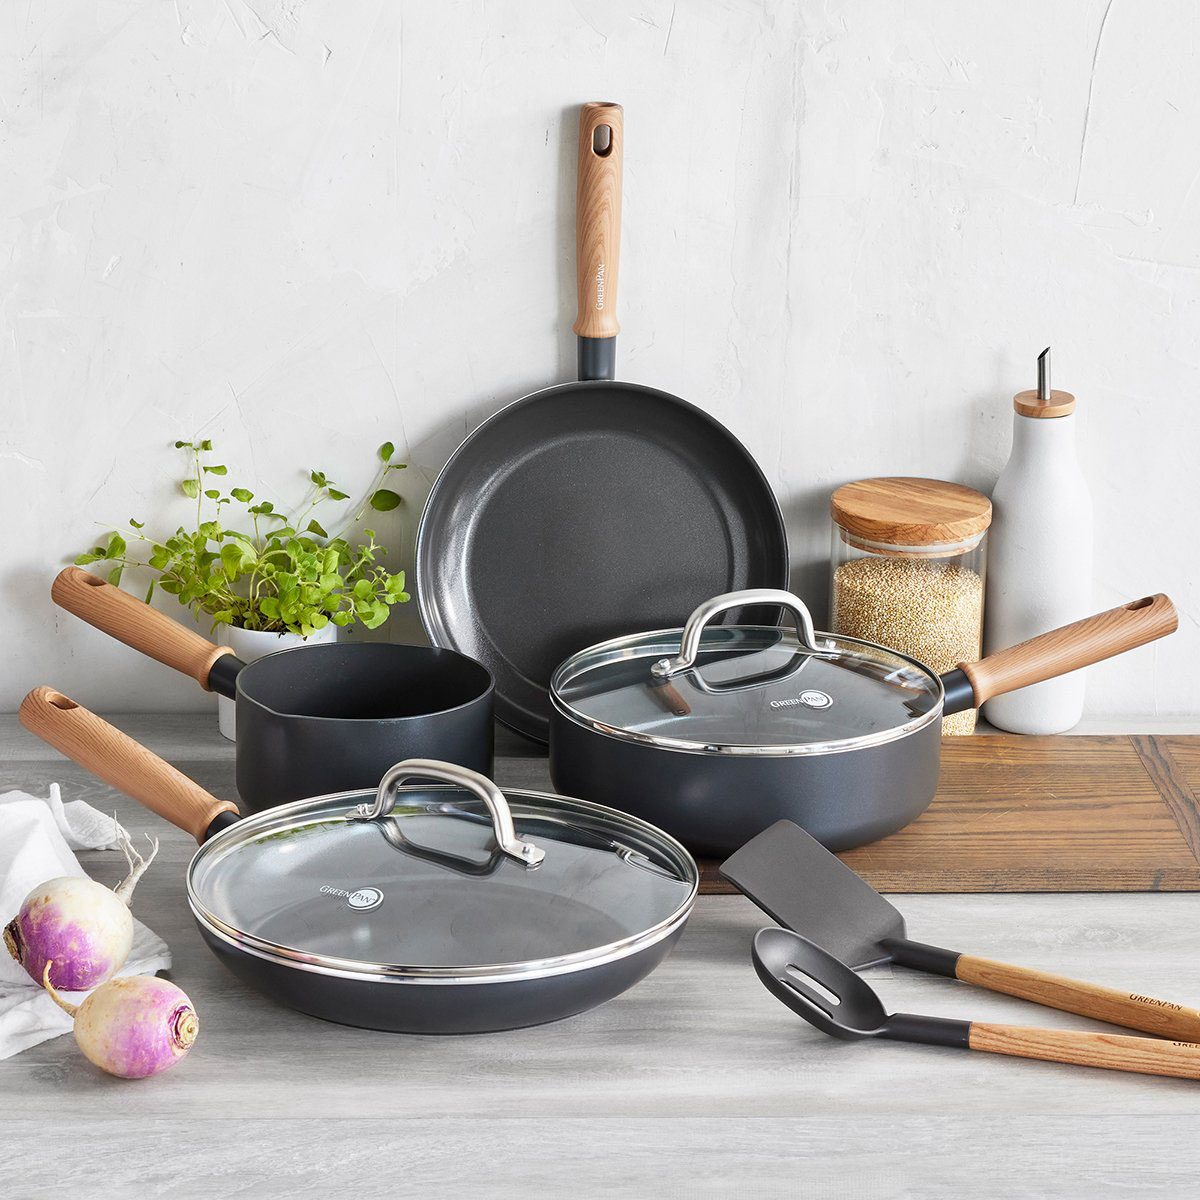 GreenPan cookware sale: Save up to 65% on pots and pans at this